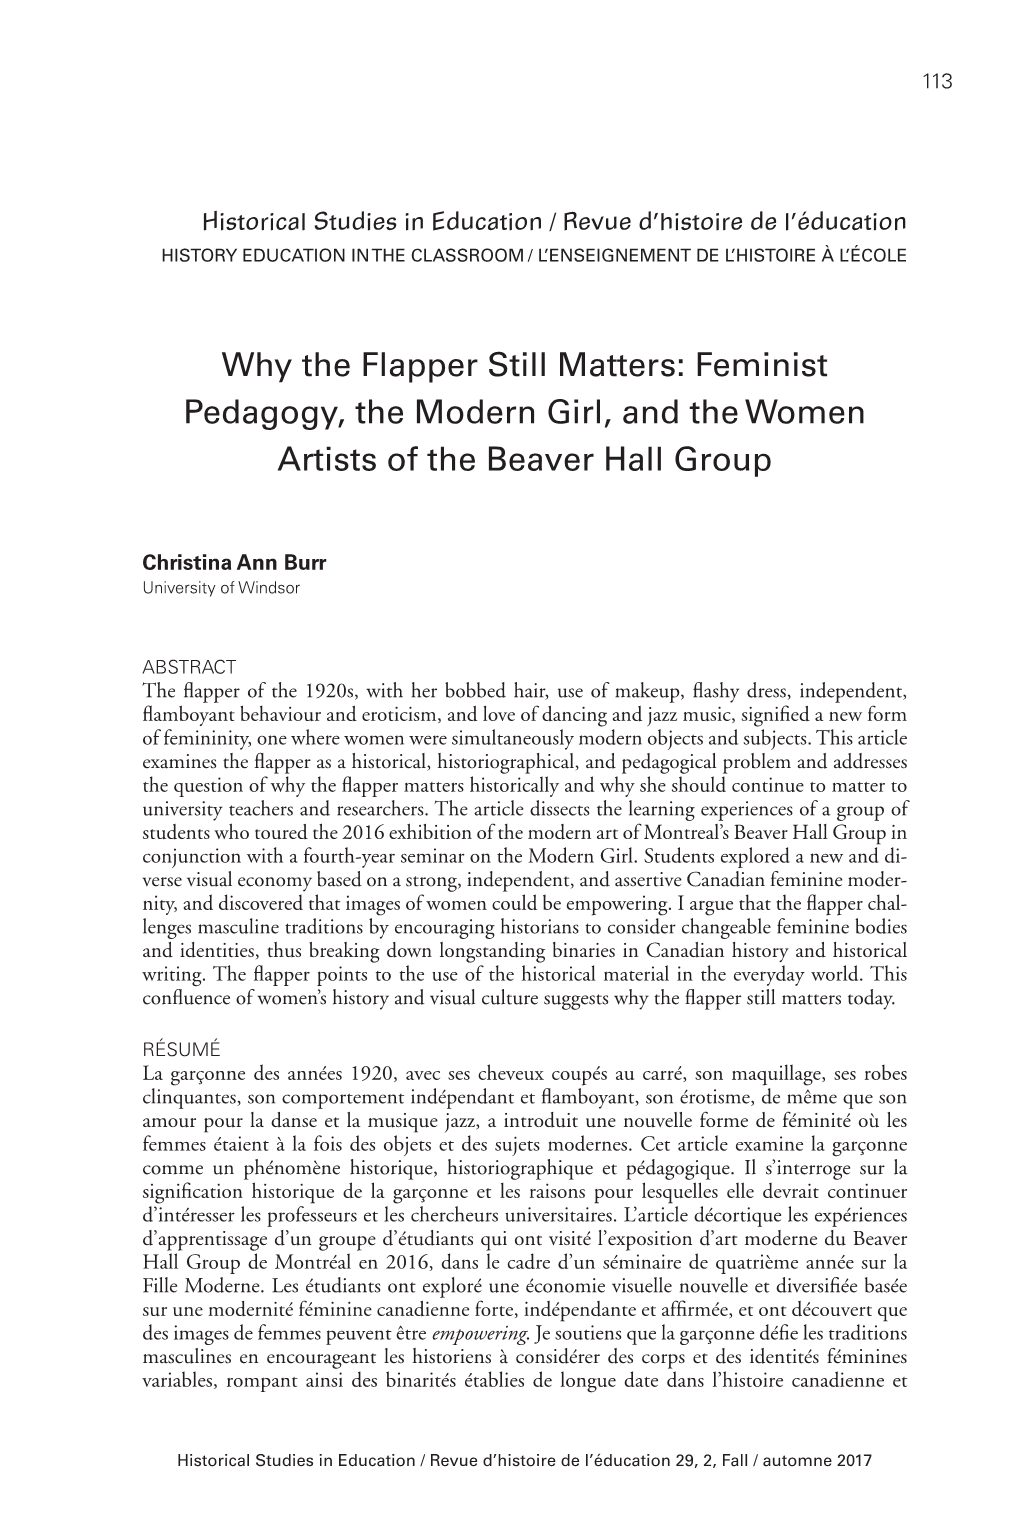 Why the Flapper Still Matters: Feminist Pedagogy, the Modern Girl, and the Women Artists of the Beaver Hall Group